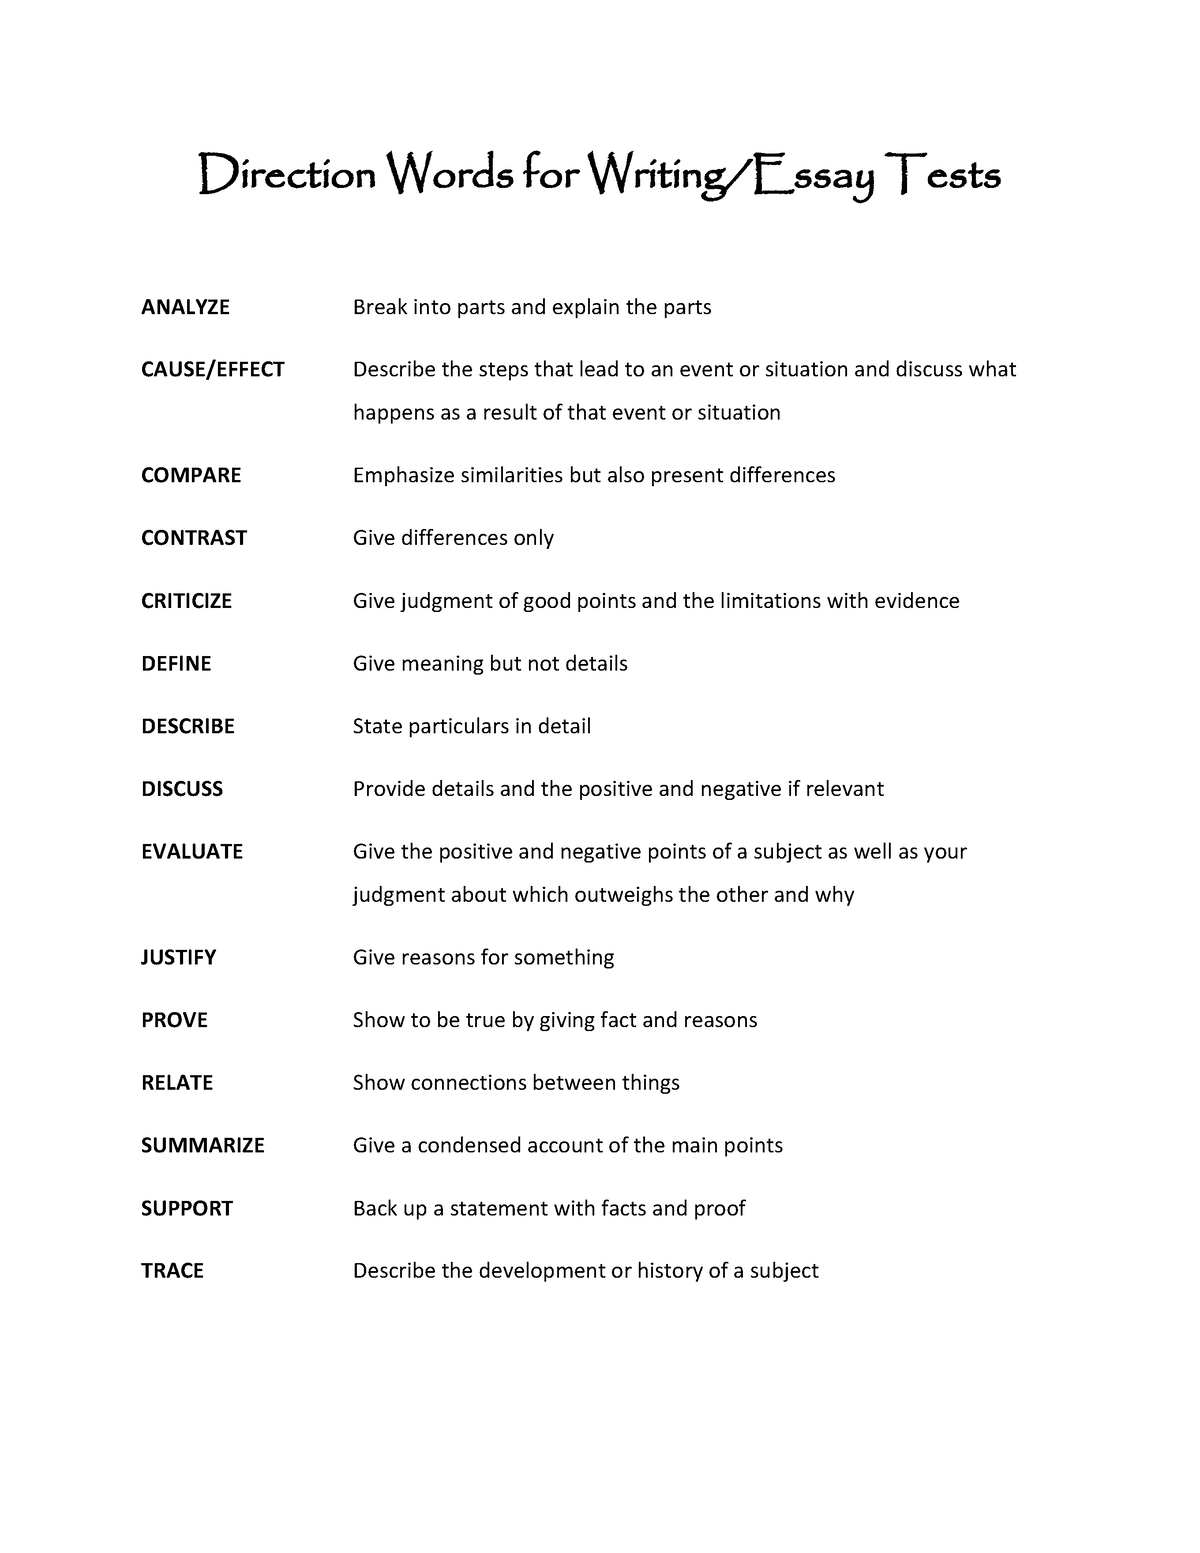 direction of essay test